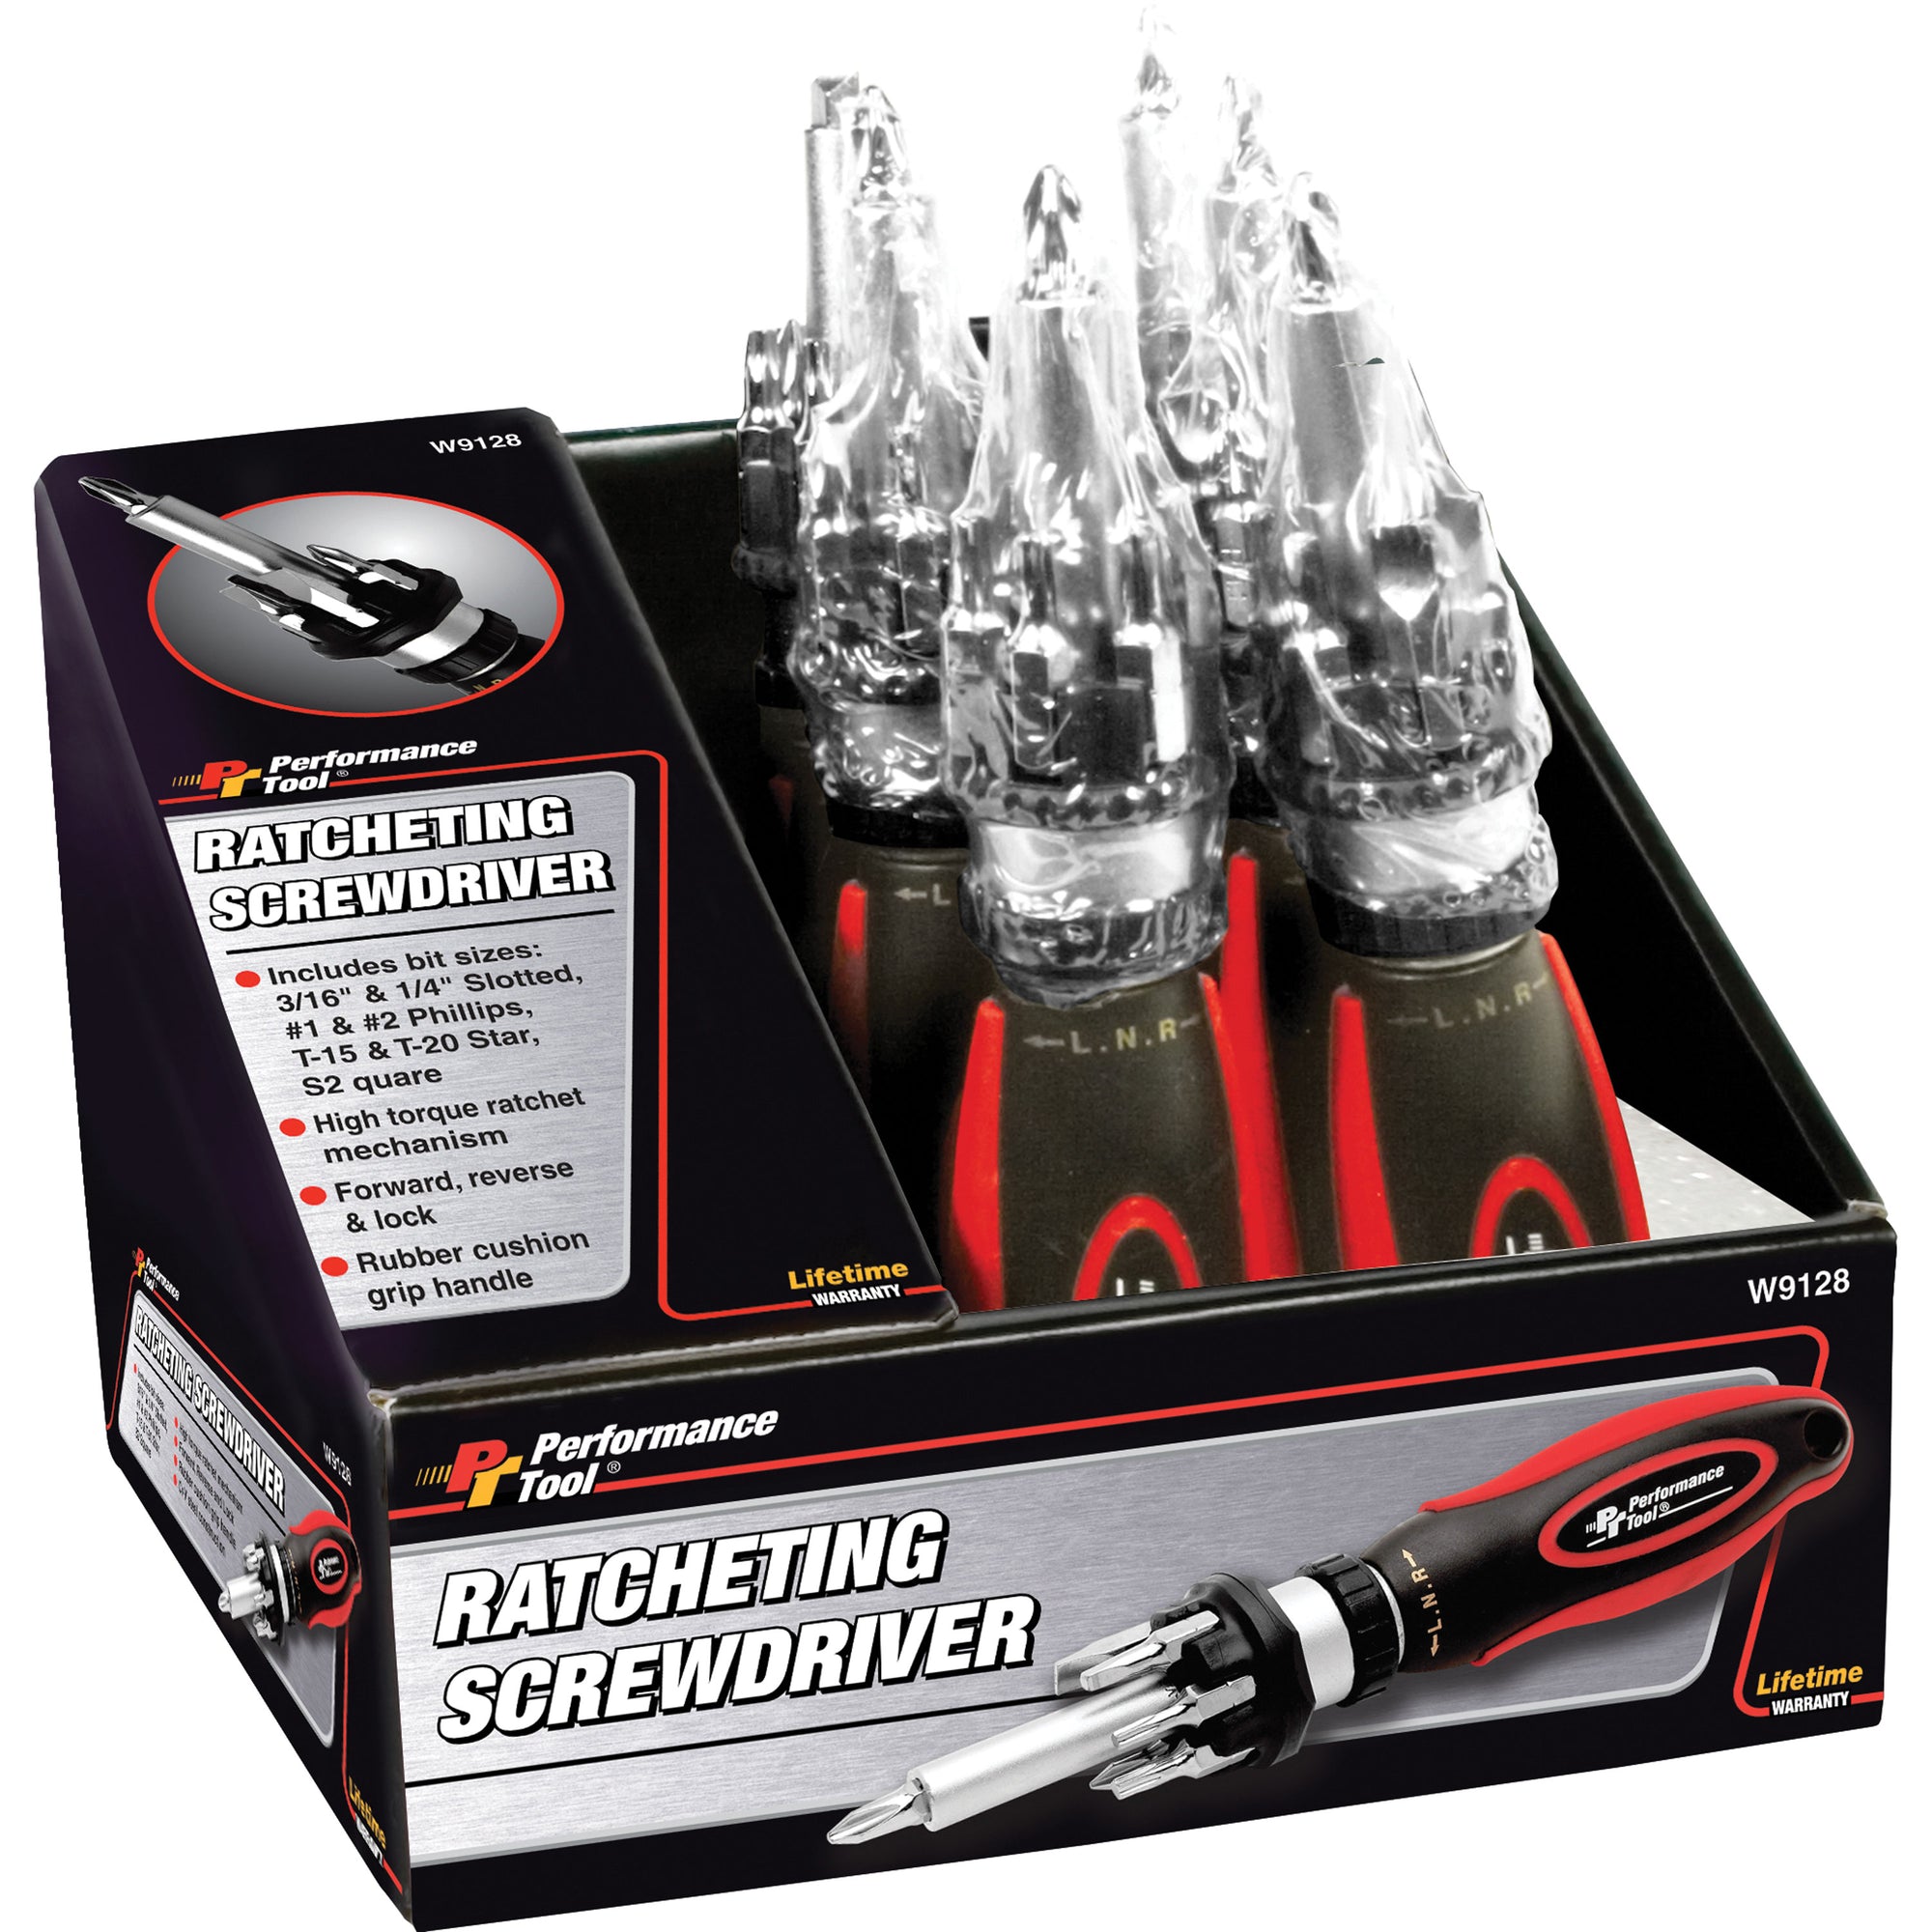 Wilmar W9128 High Torque Ratcheting Screwdriver with Bits Display - 6 Pack